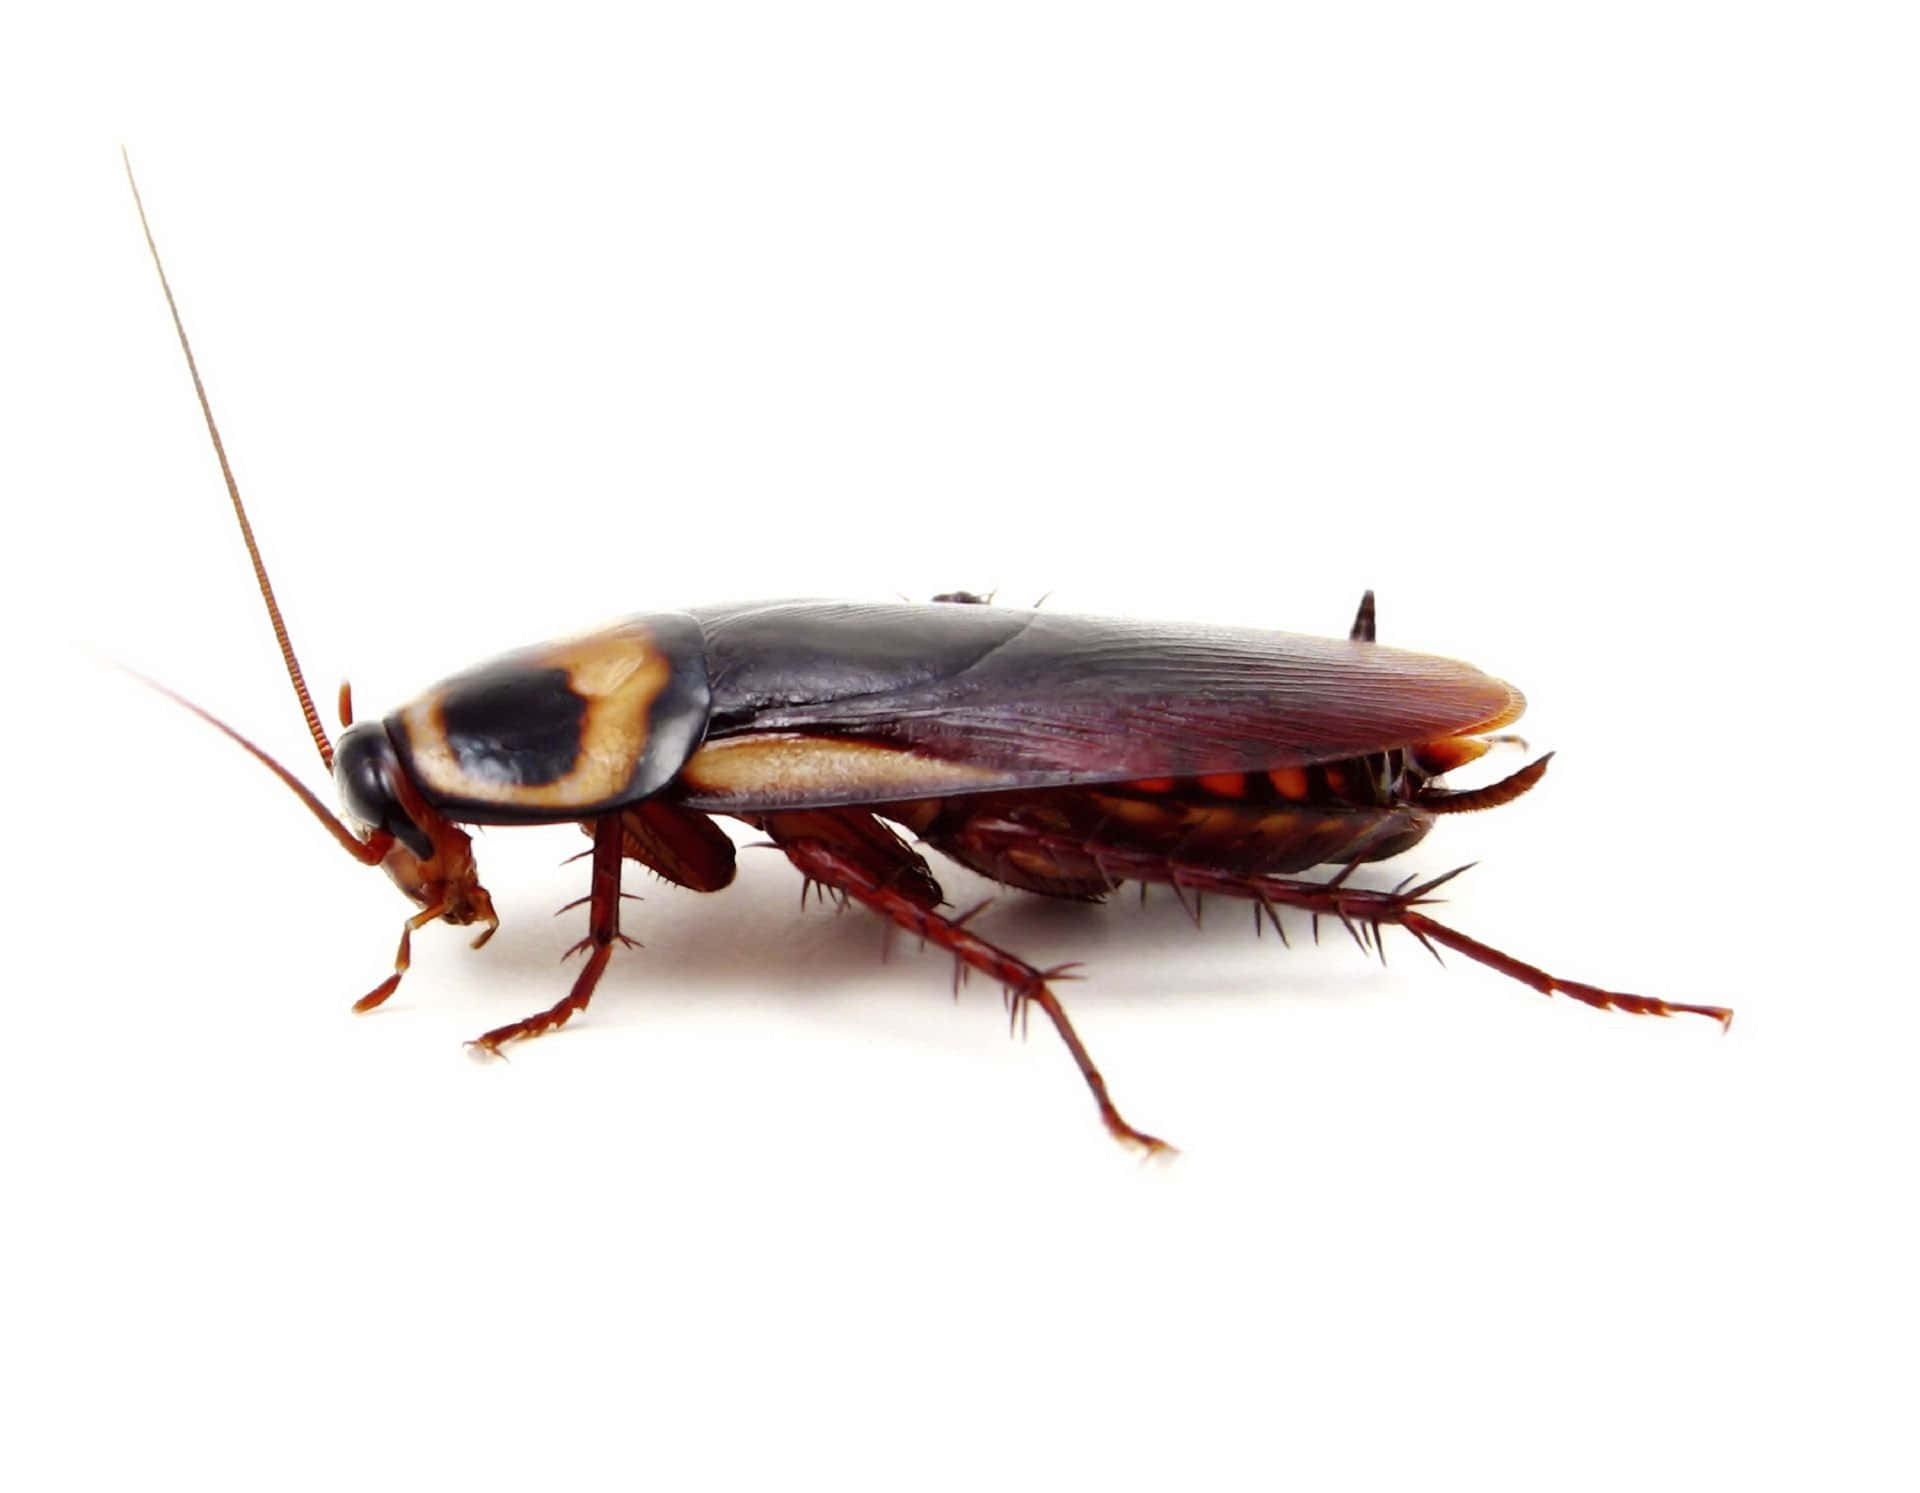 A common species of cockroach in the backyard